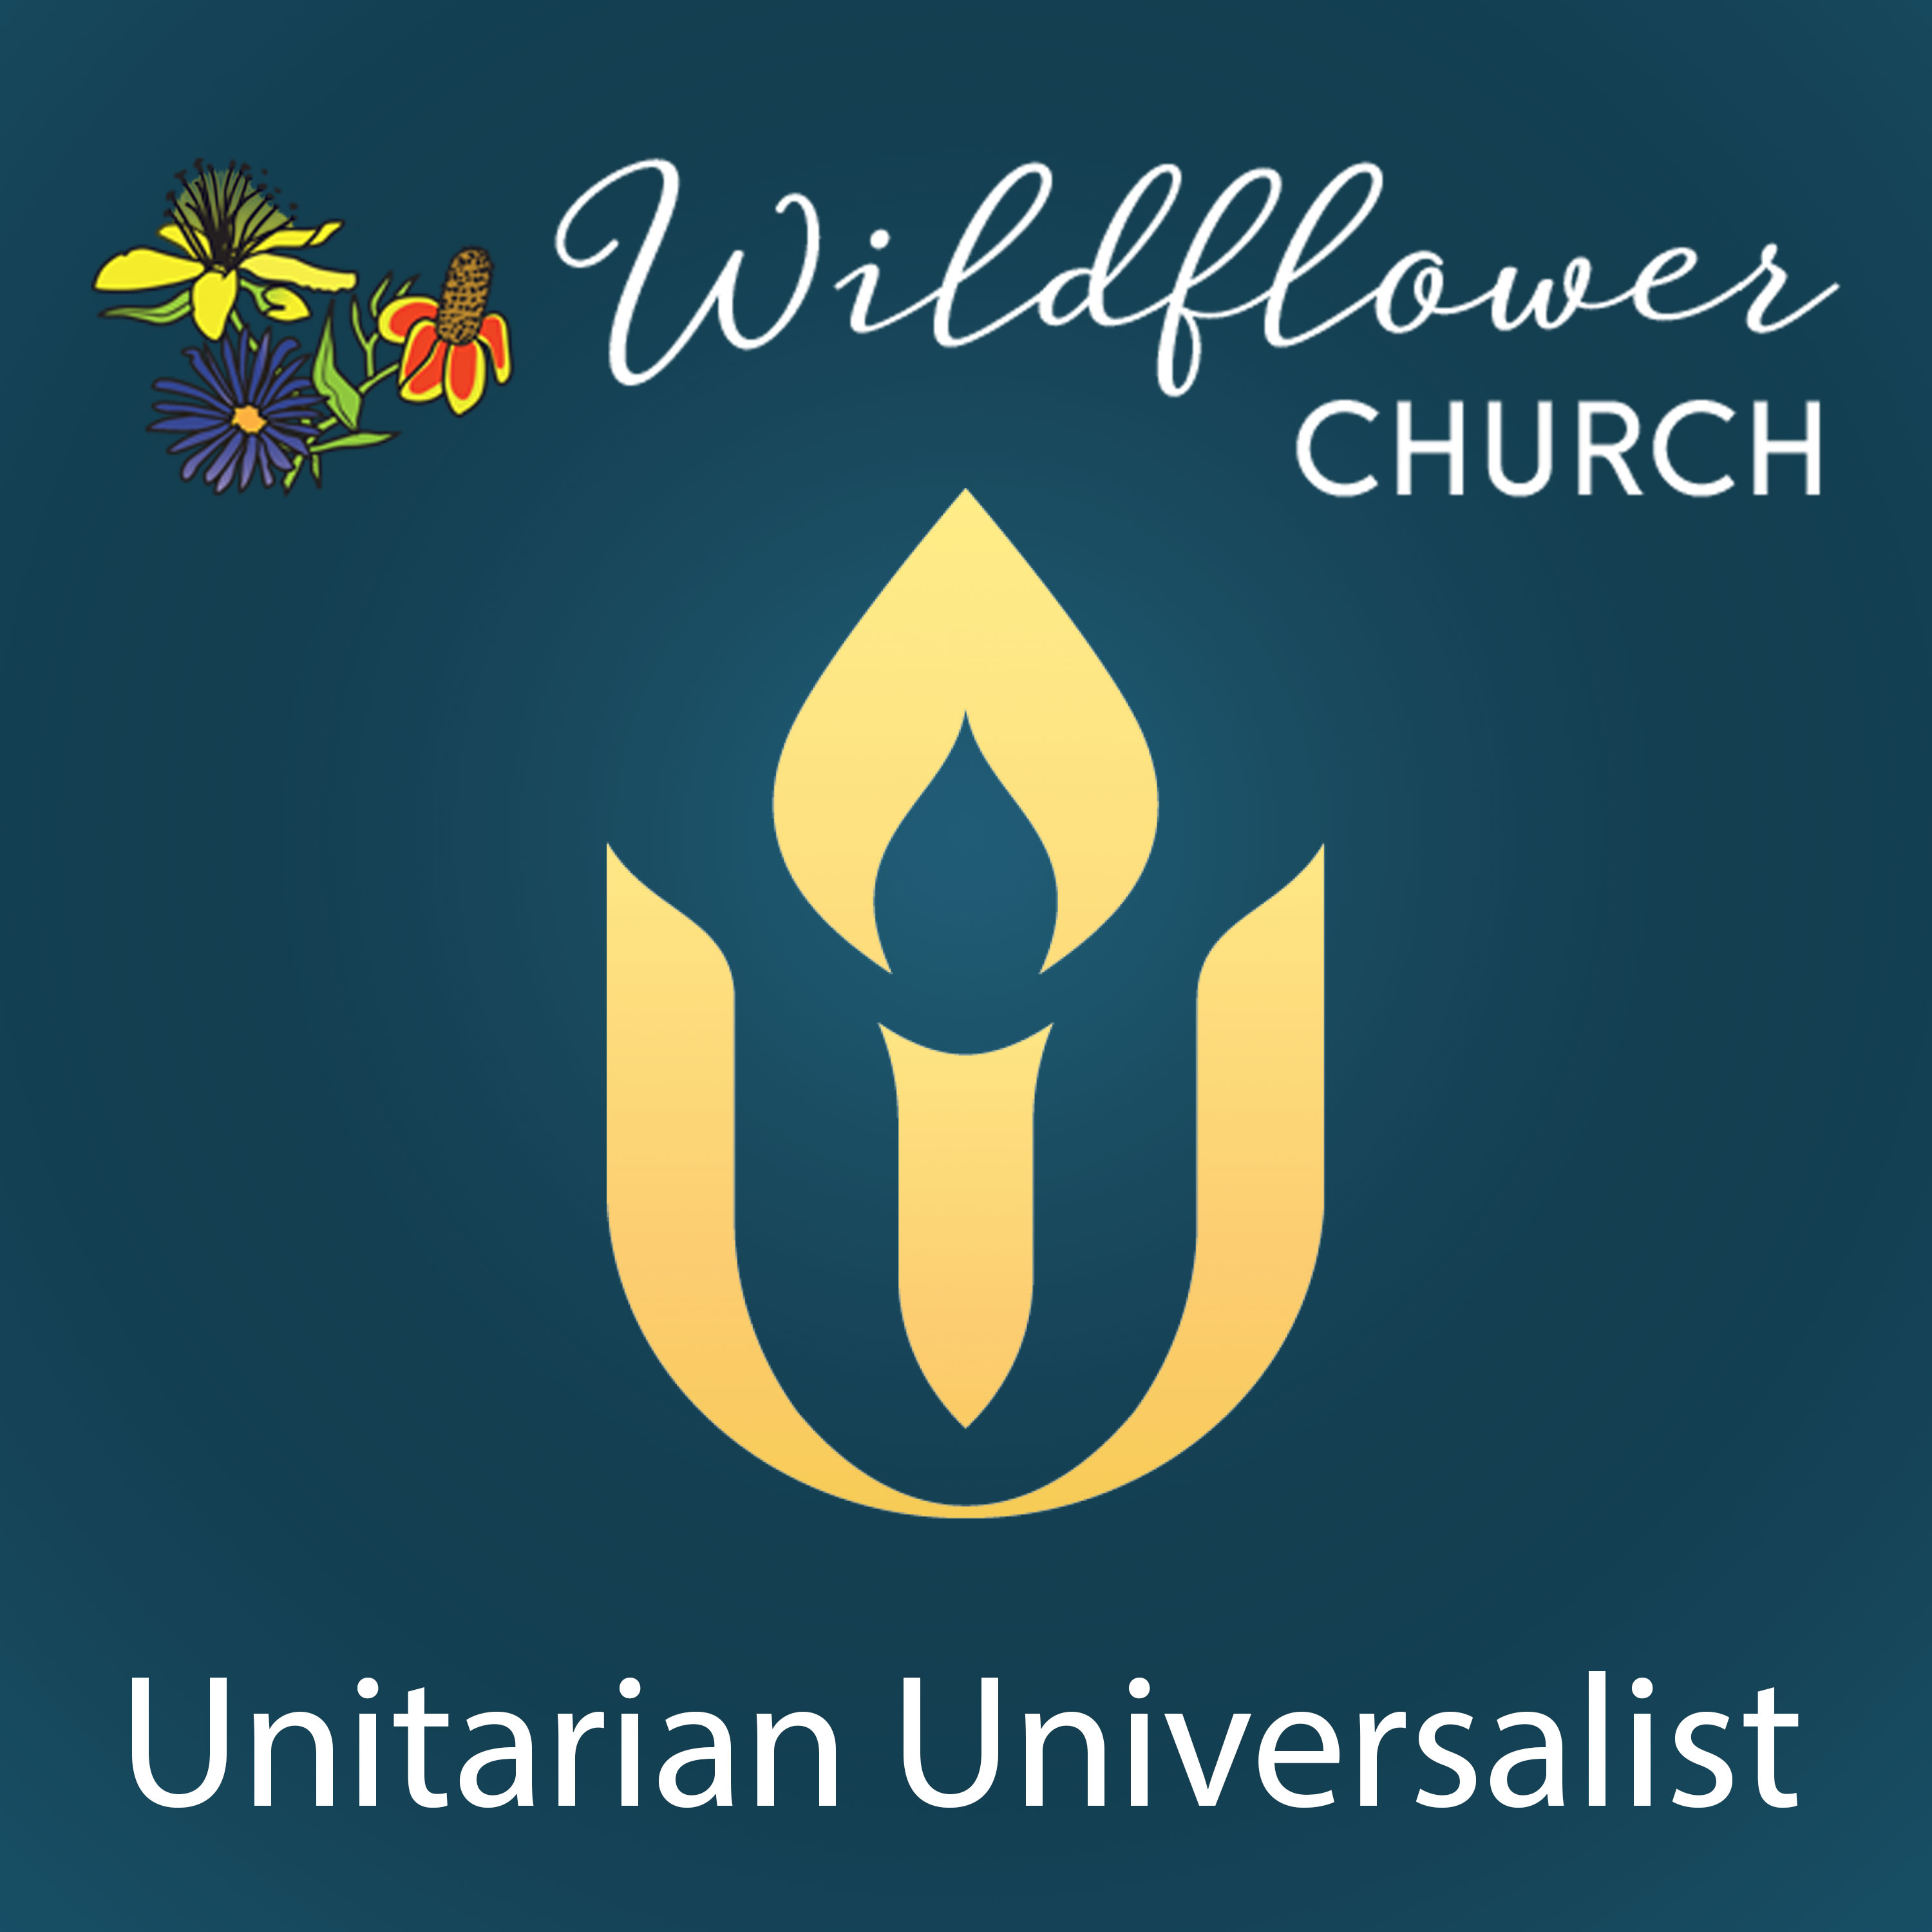 Our Unitarian Universalist Flower Communion: Embracing Beauty in Difficult Times